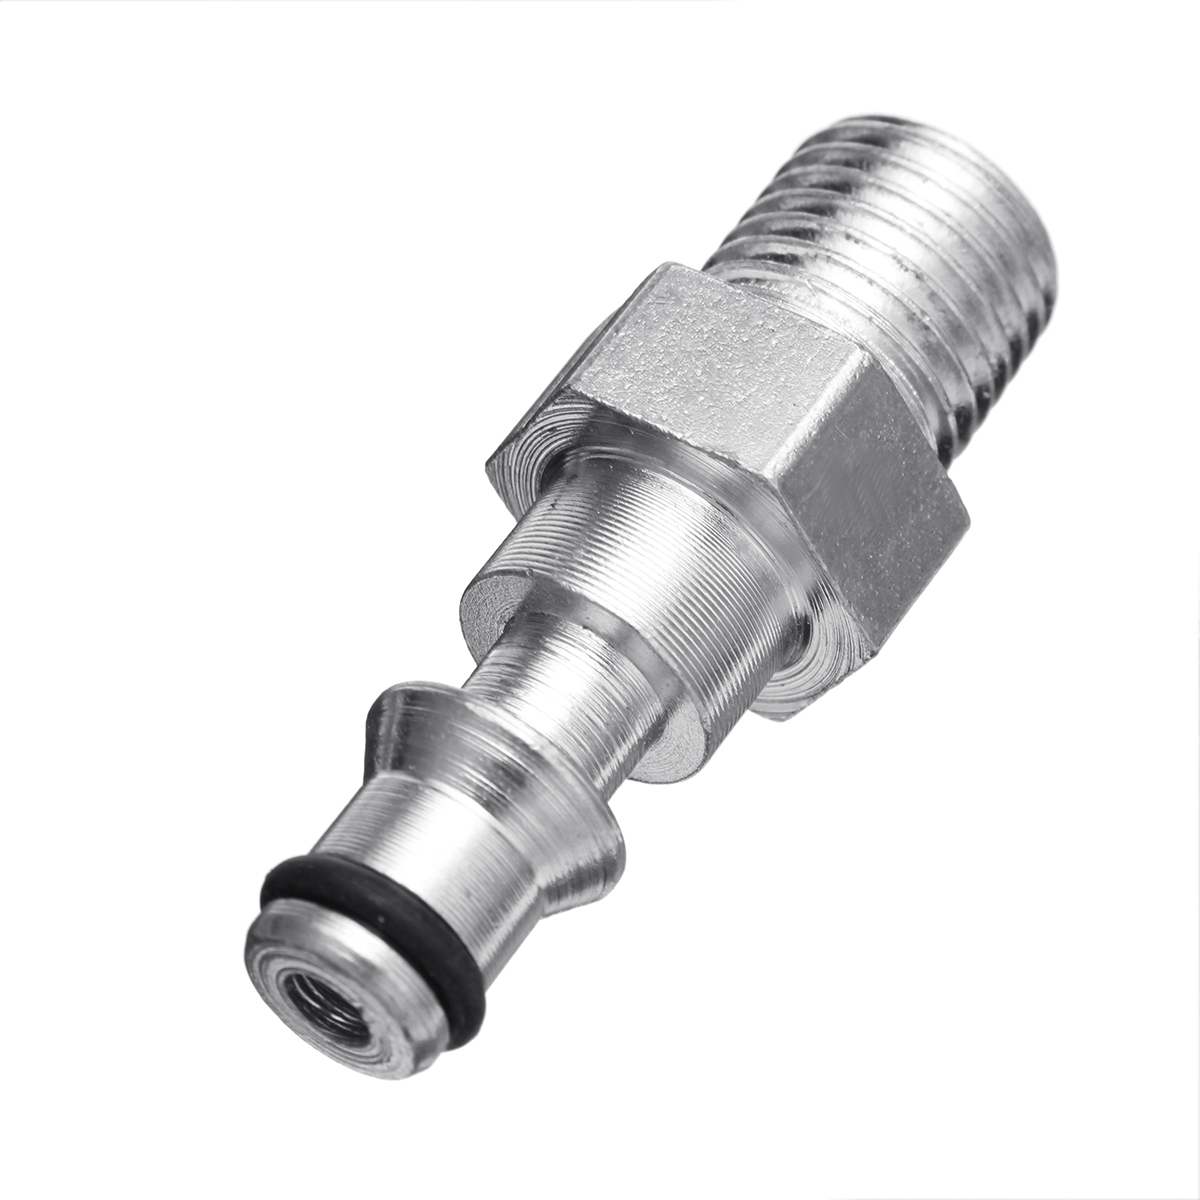 Quick-Connection-Pressure-Washer-Gun-Hose-Fitting-To-M14-Adapter-For-Lavor-VAX-1299221-2